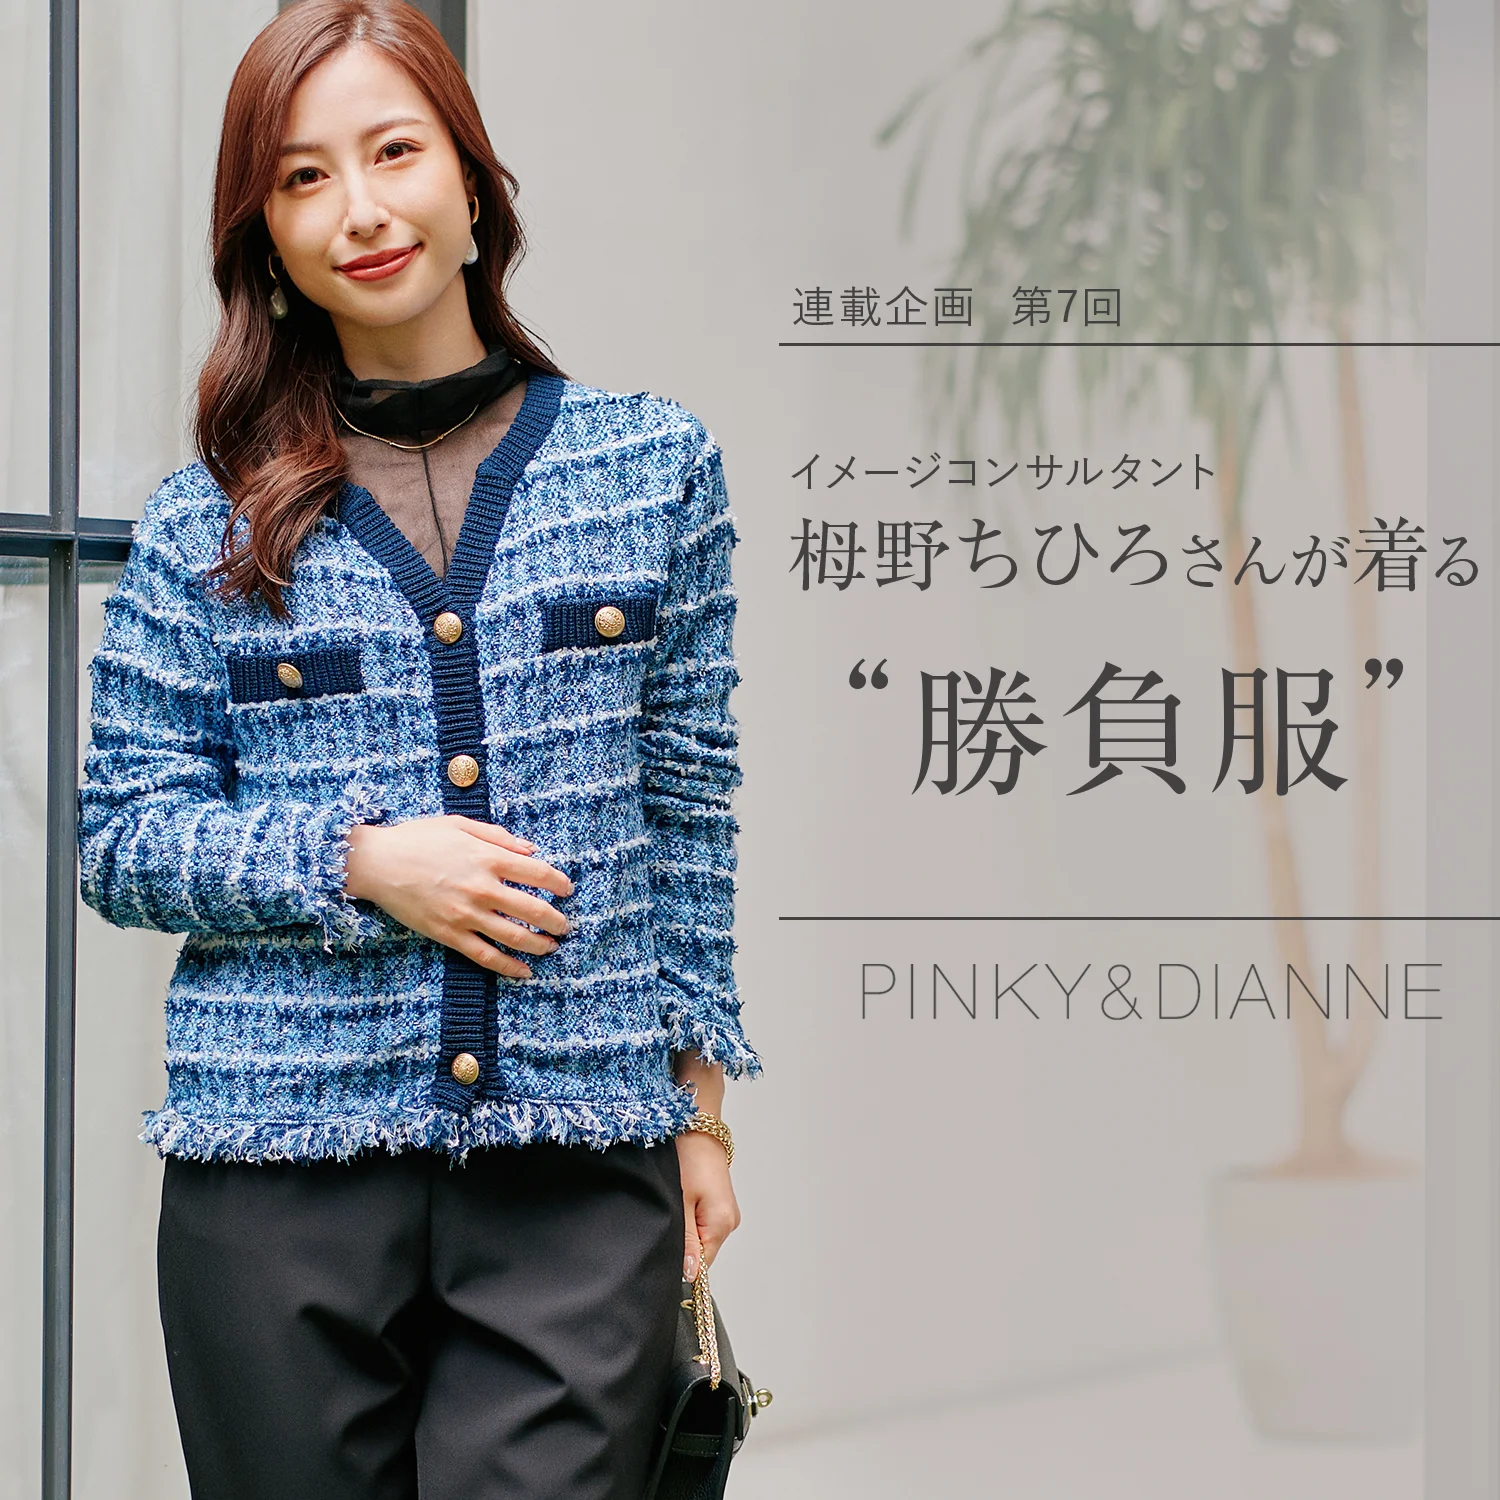 PINKY & DIANNE（ピンキーアンドダイアン）の公式通販サイト。PINKY